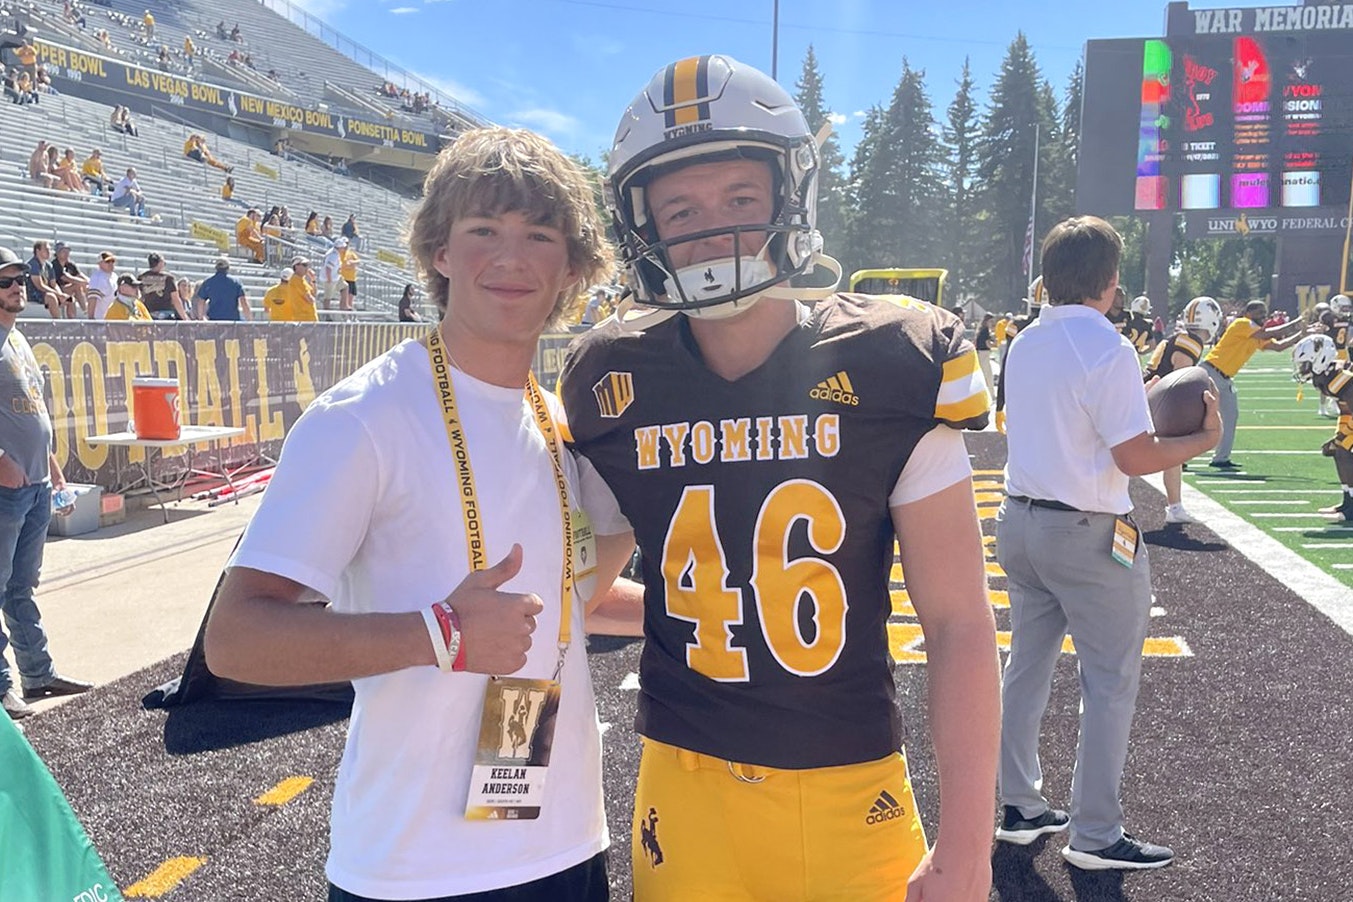 South High School senior Keelan Anderson, left, has the nation's longest field goal this season at 61 yards. He's seen here with University of Wyoming kicker John Hoyland during a recent visit to War Memorial Stadium.